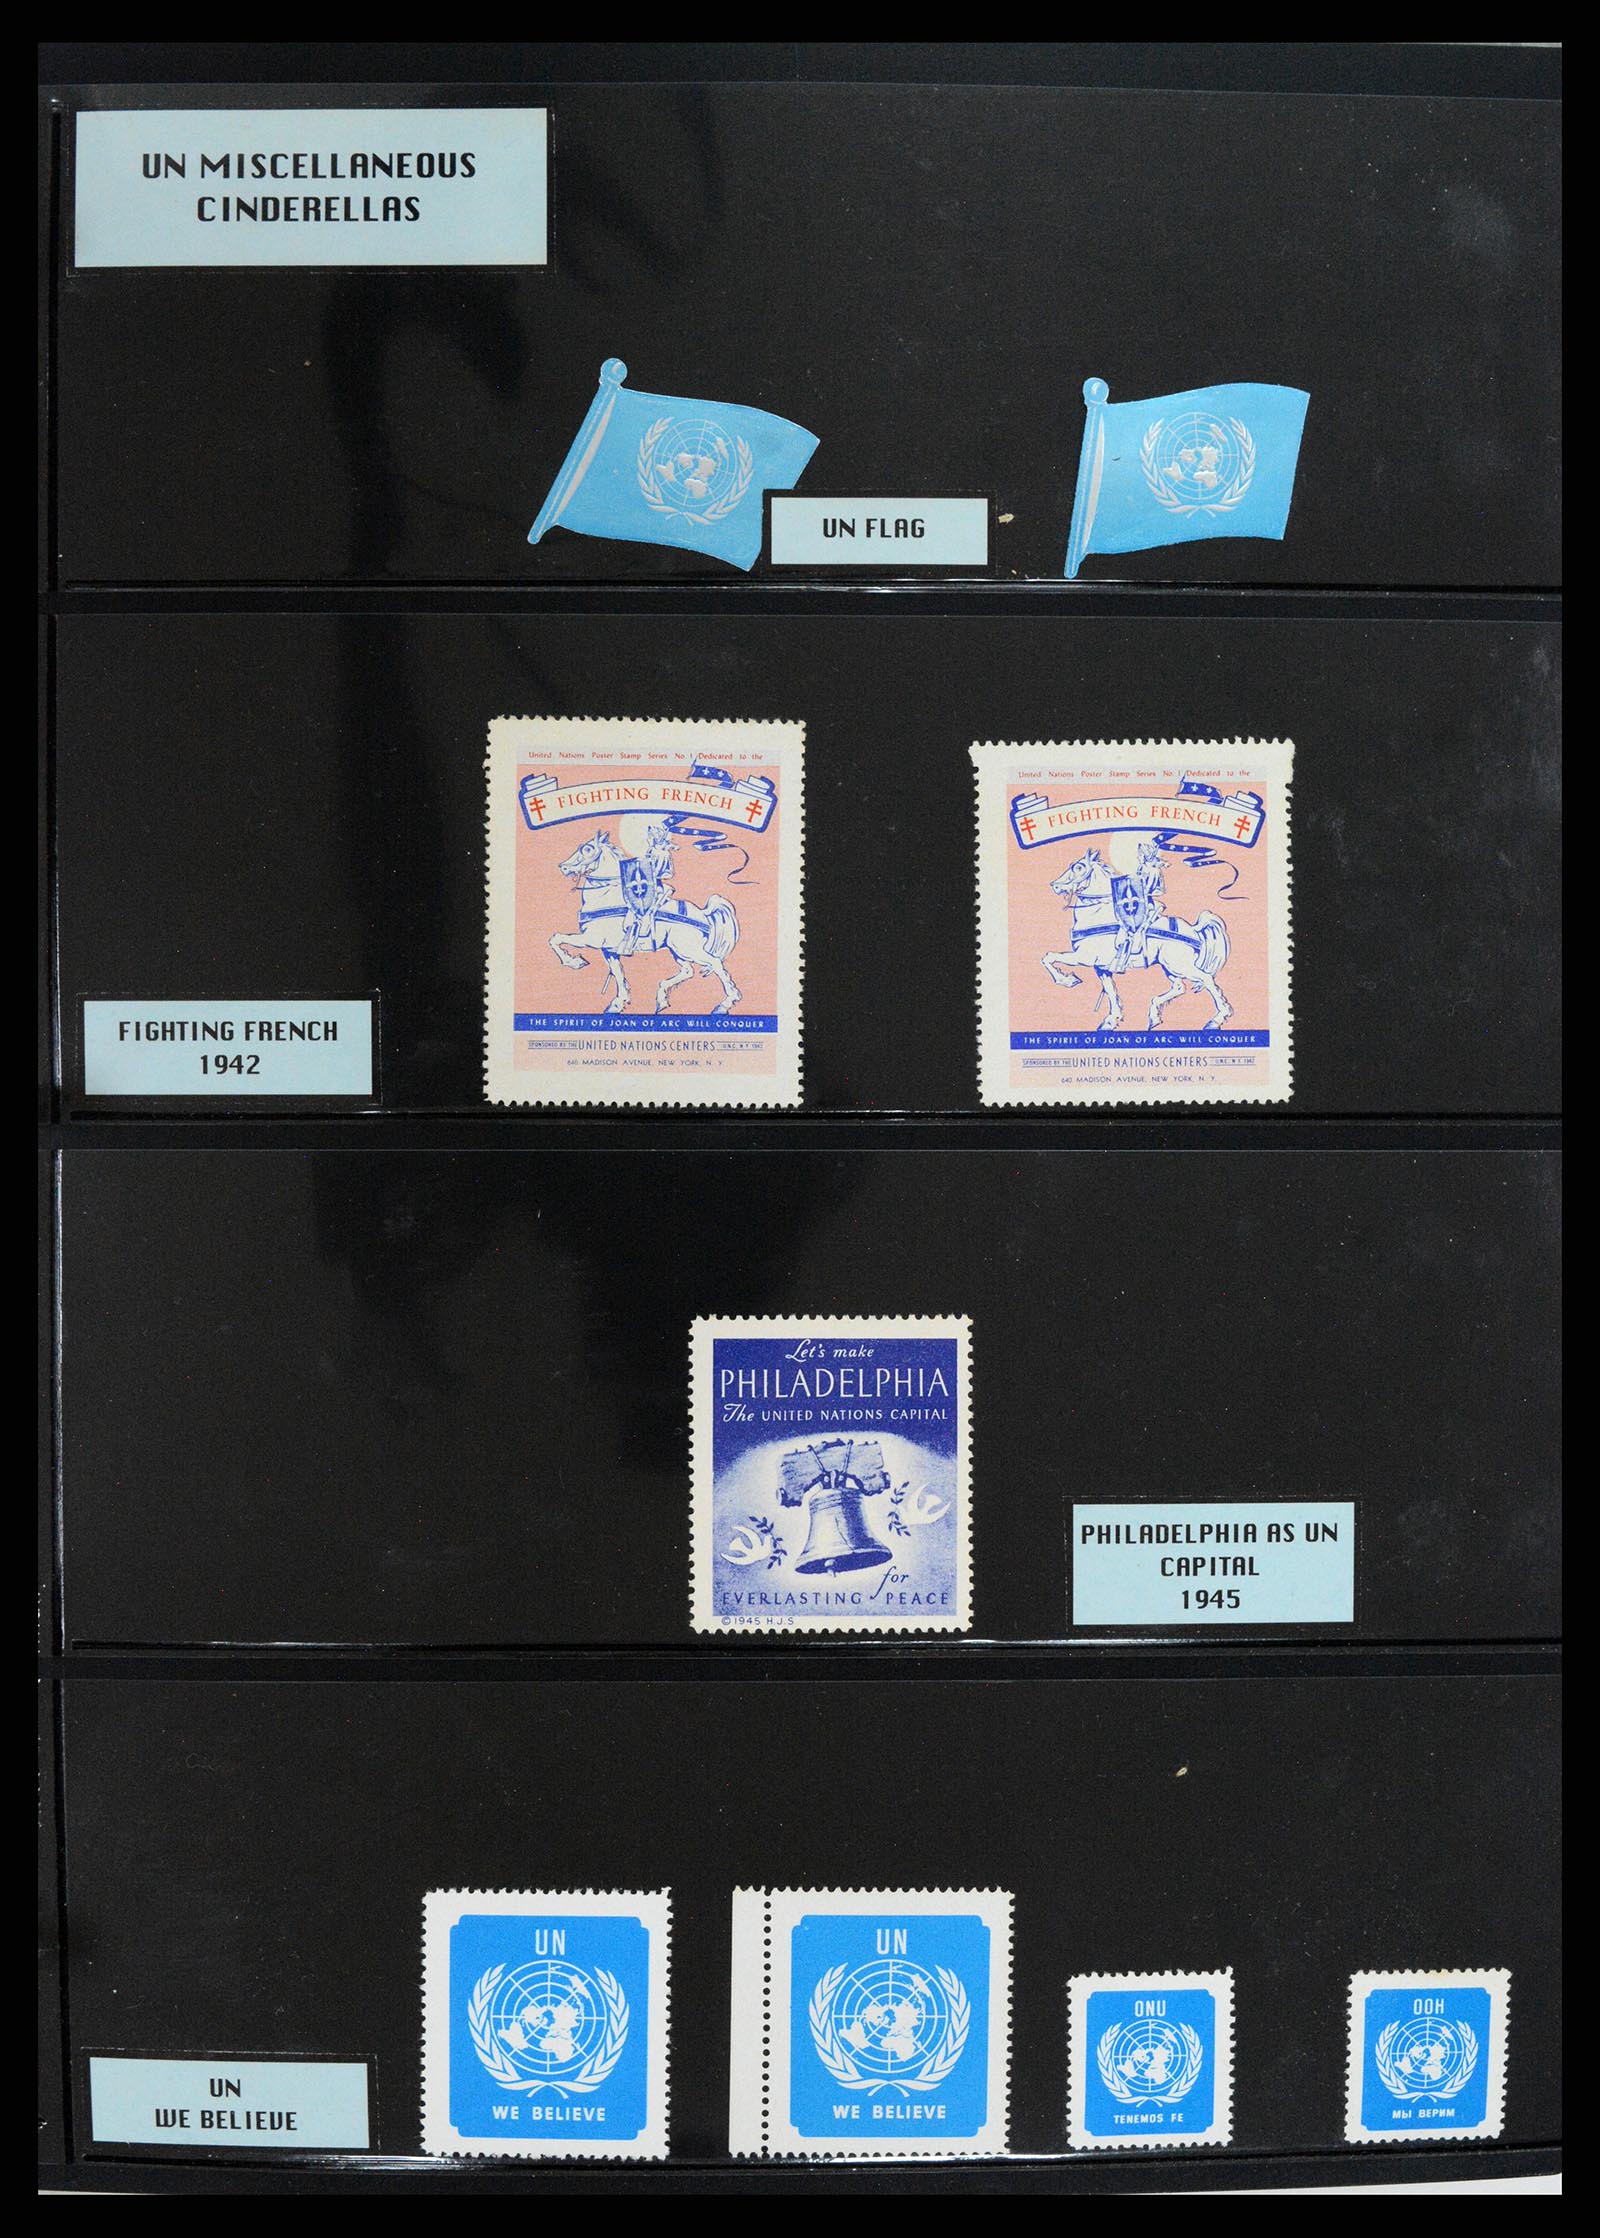 37631 001 - Stamp collection 37631 United Nations cinderella's 1942-2006.